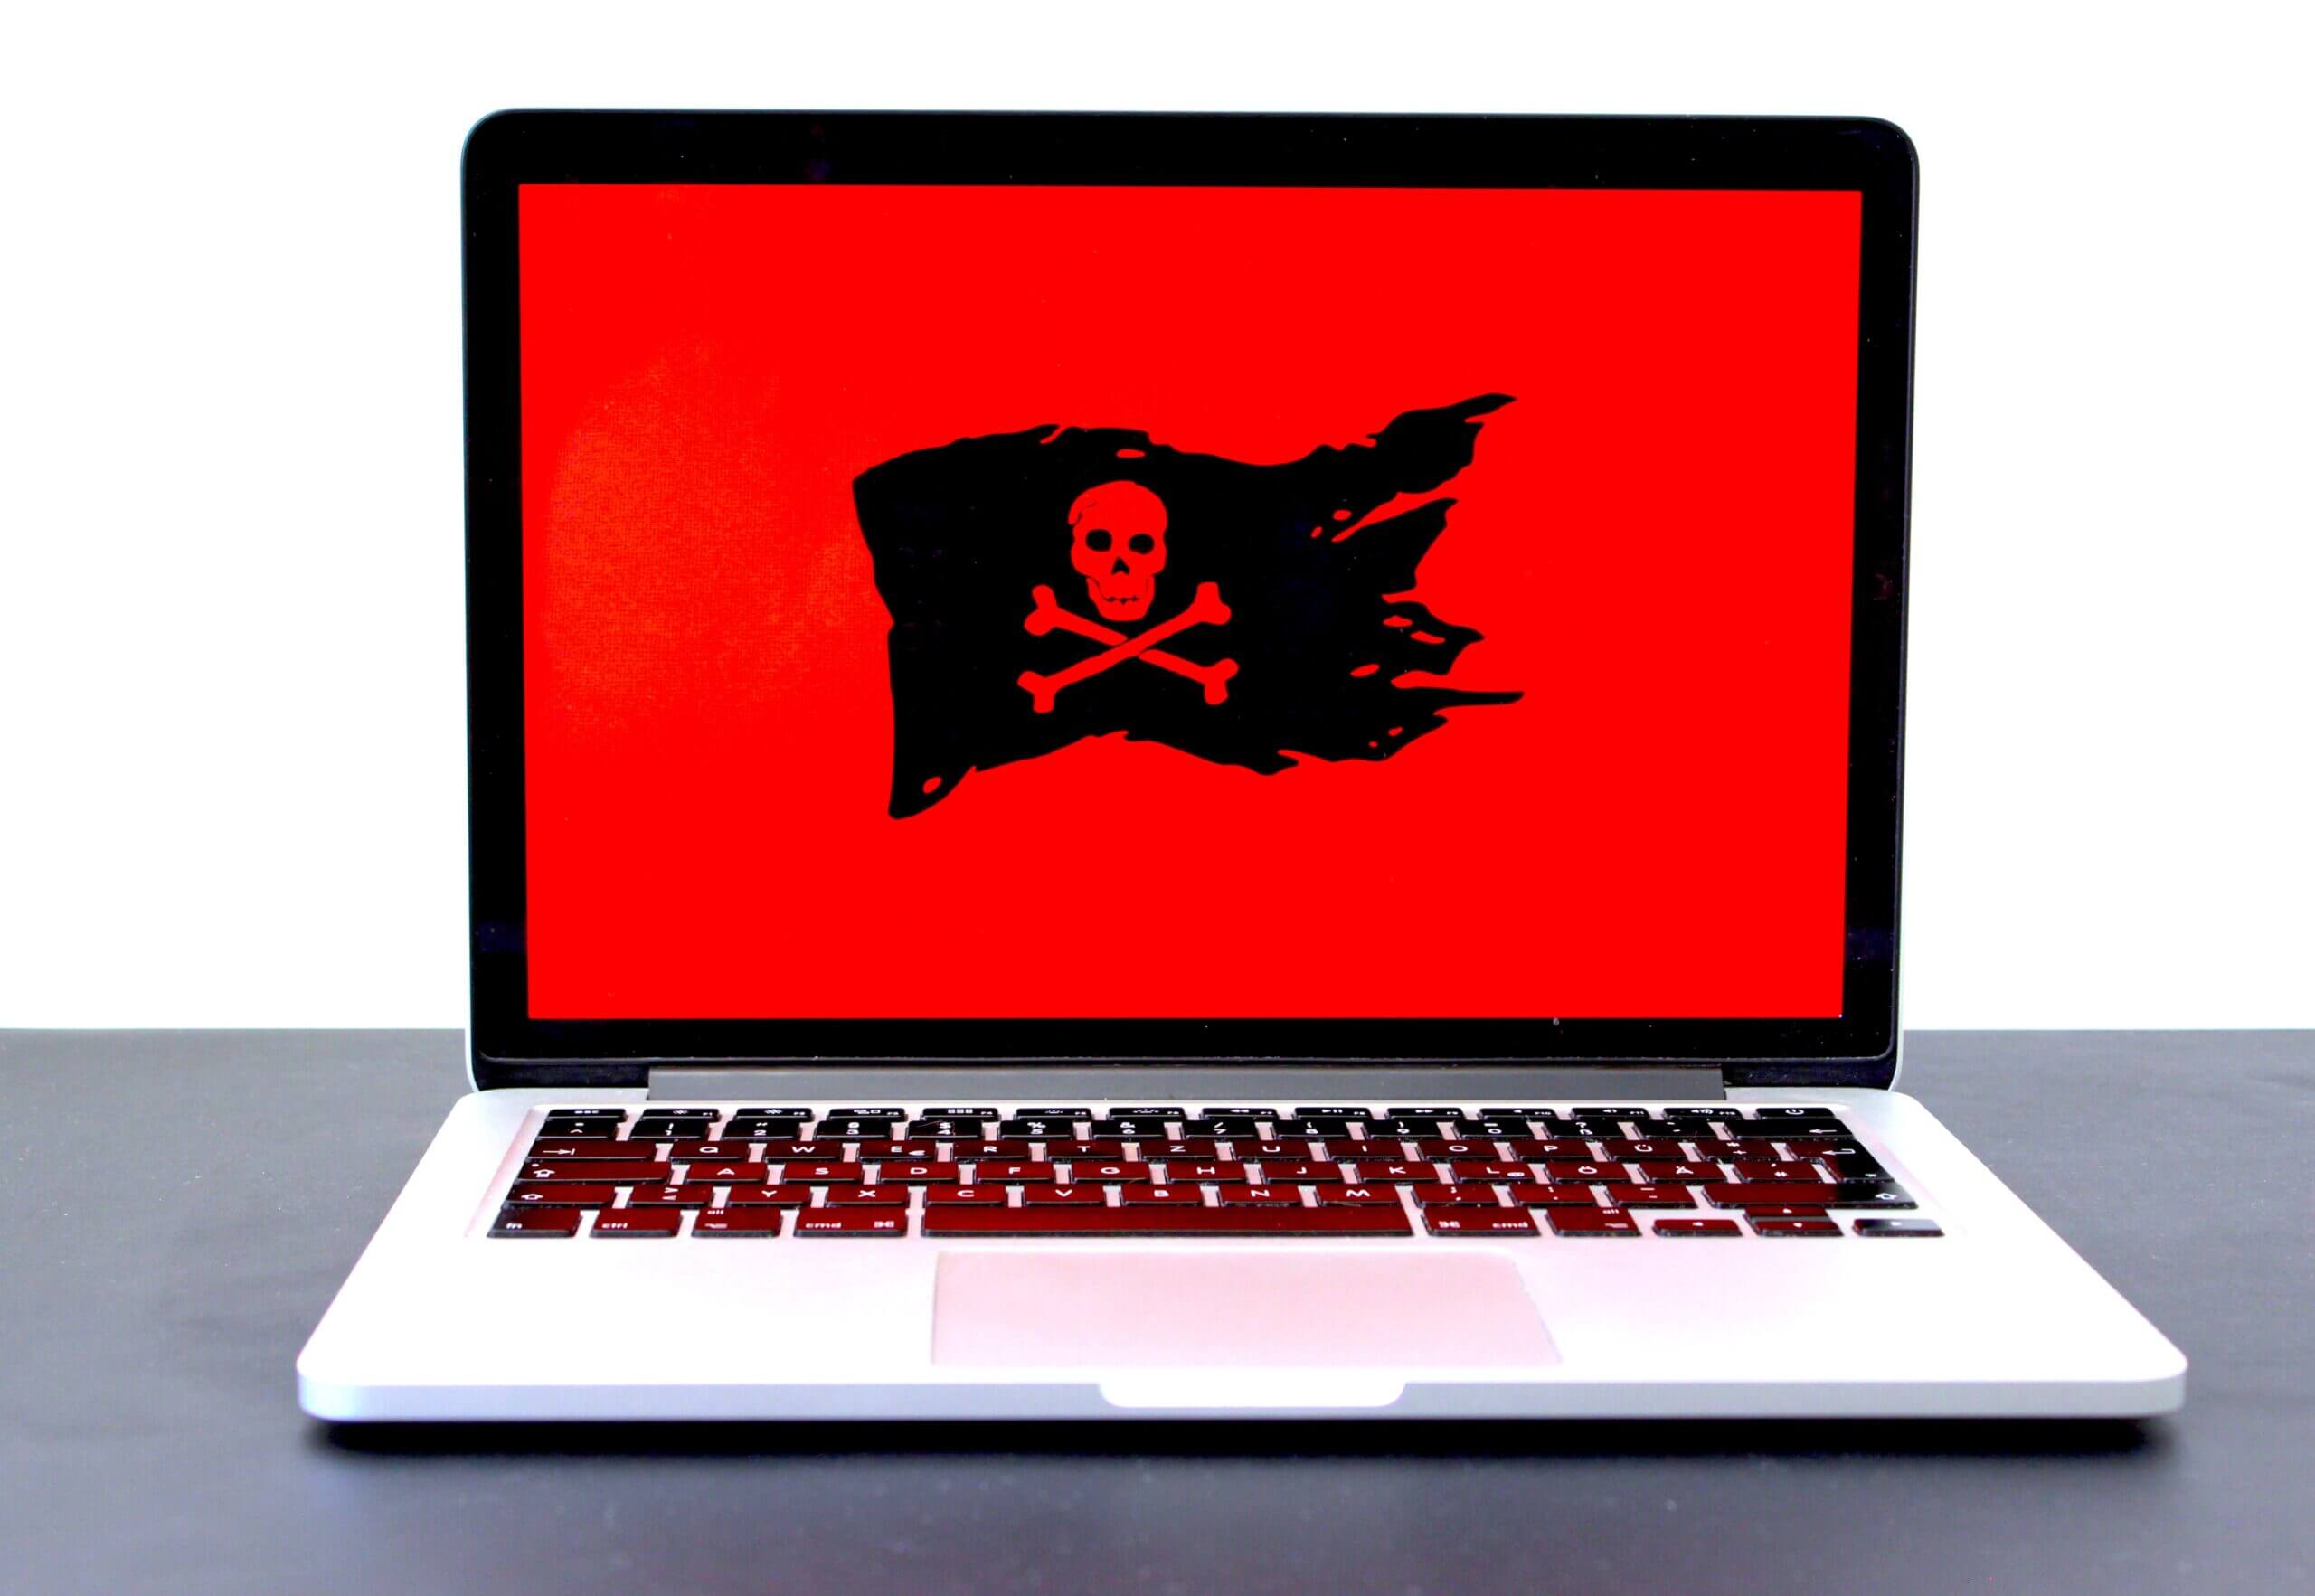 Laptop with malware and cybersecurity loaded with red background.